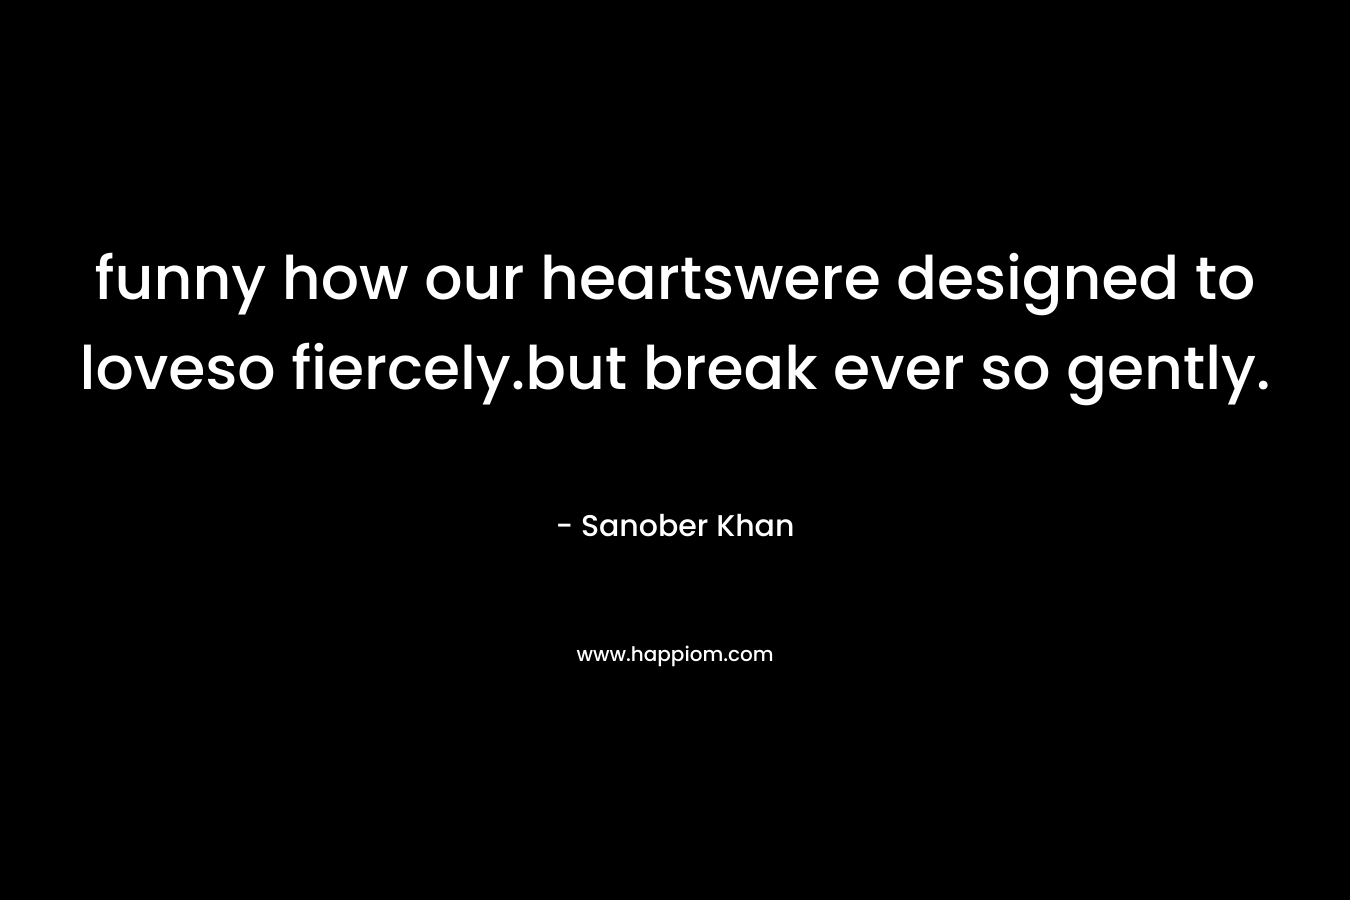 funny how our heartswere designed to loveso fiercely.but break ever so gently.